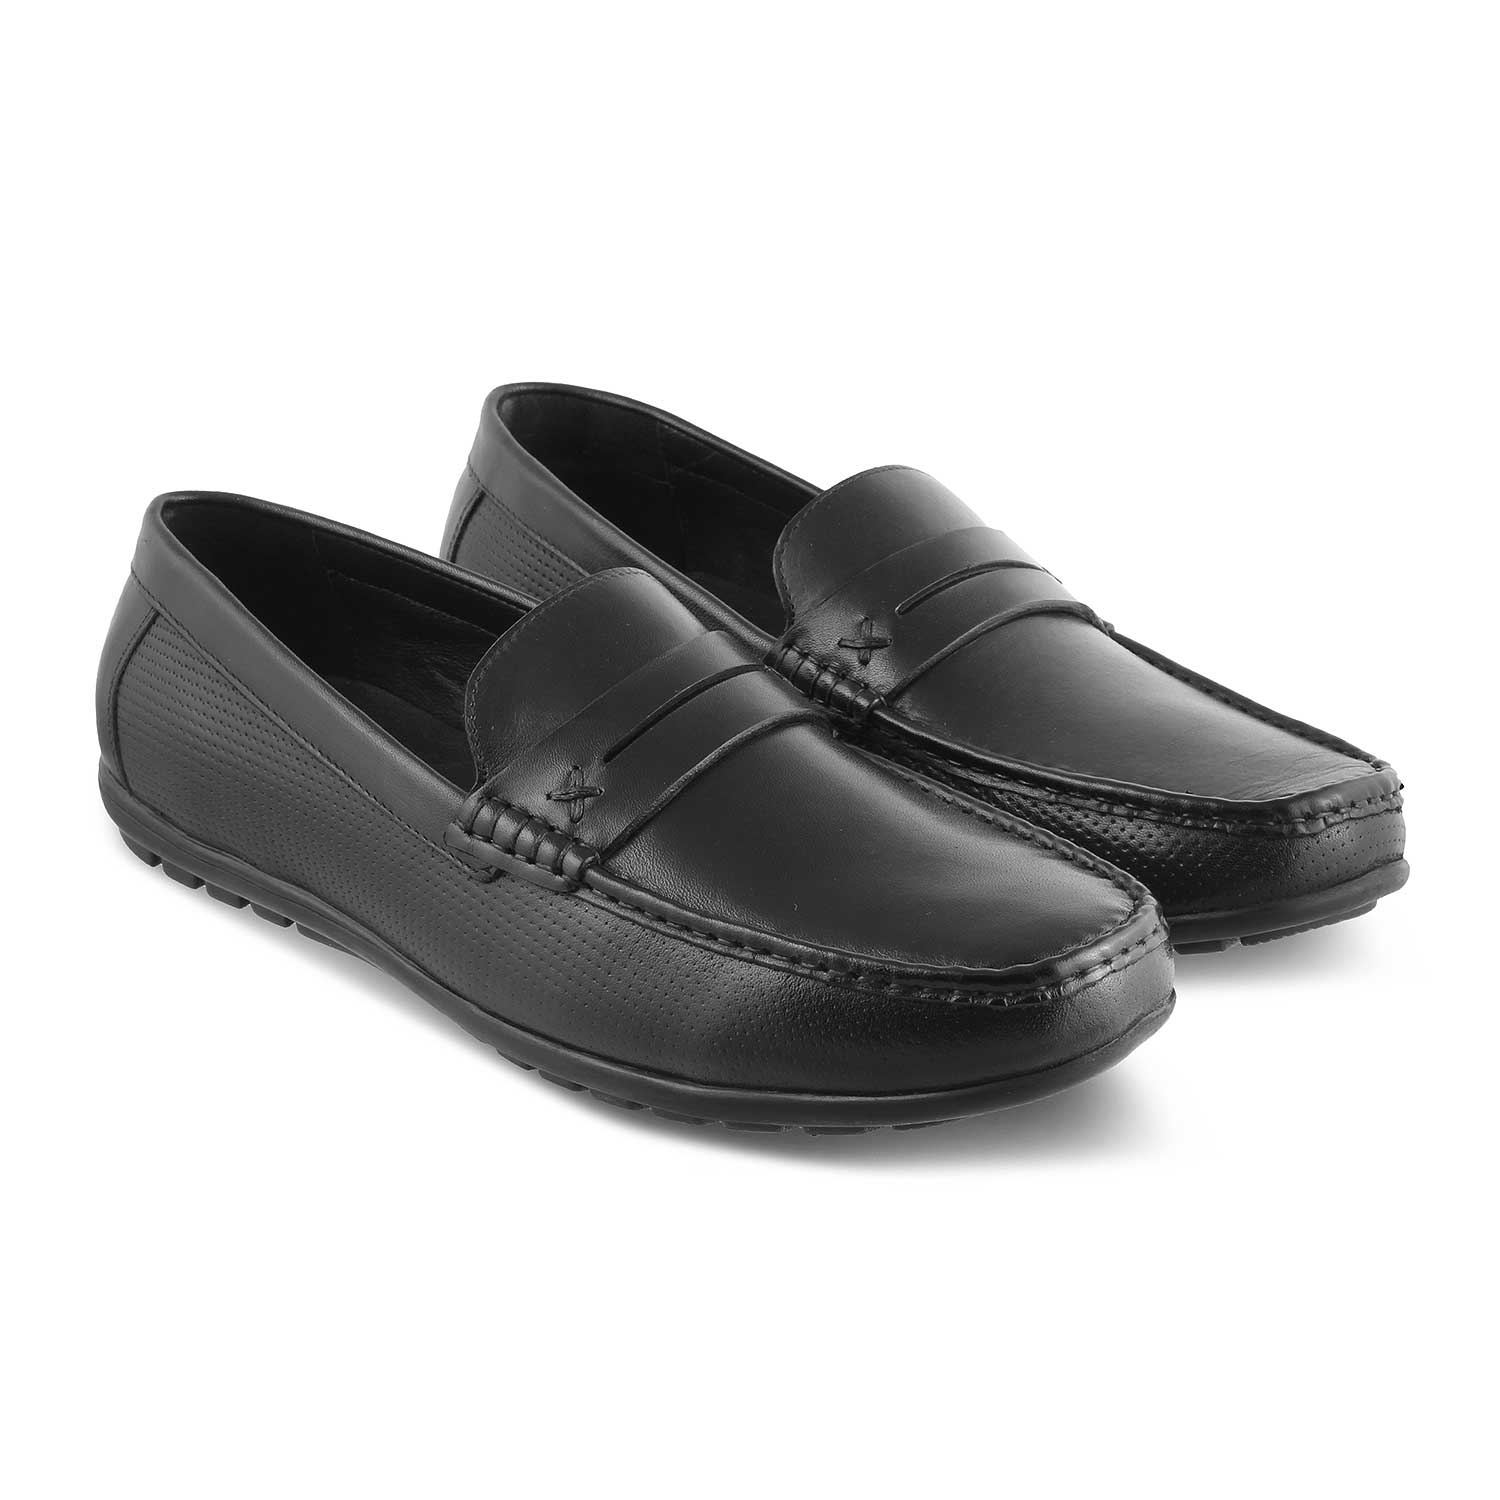 Tresmode-The Yolof Black Men's Leather Loafers Tresmode-Tresmode